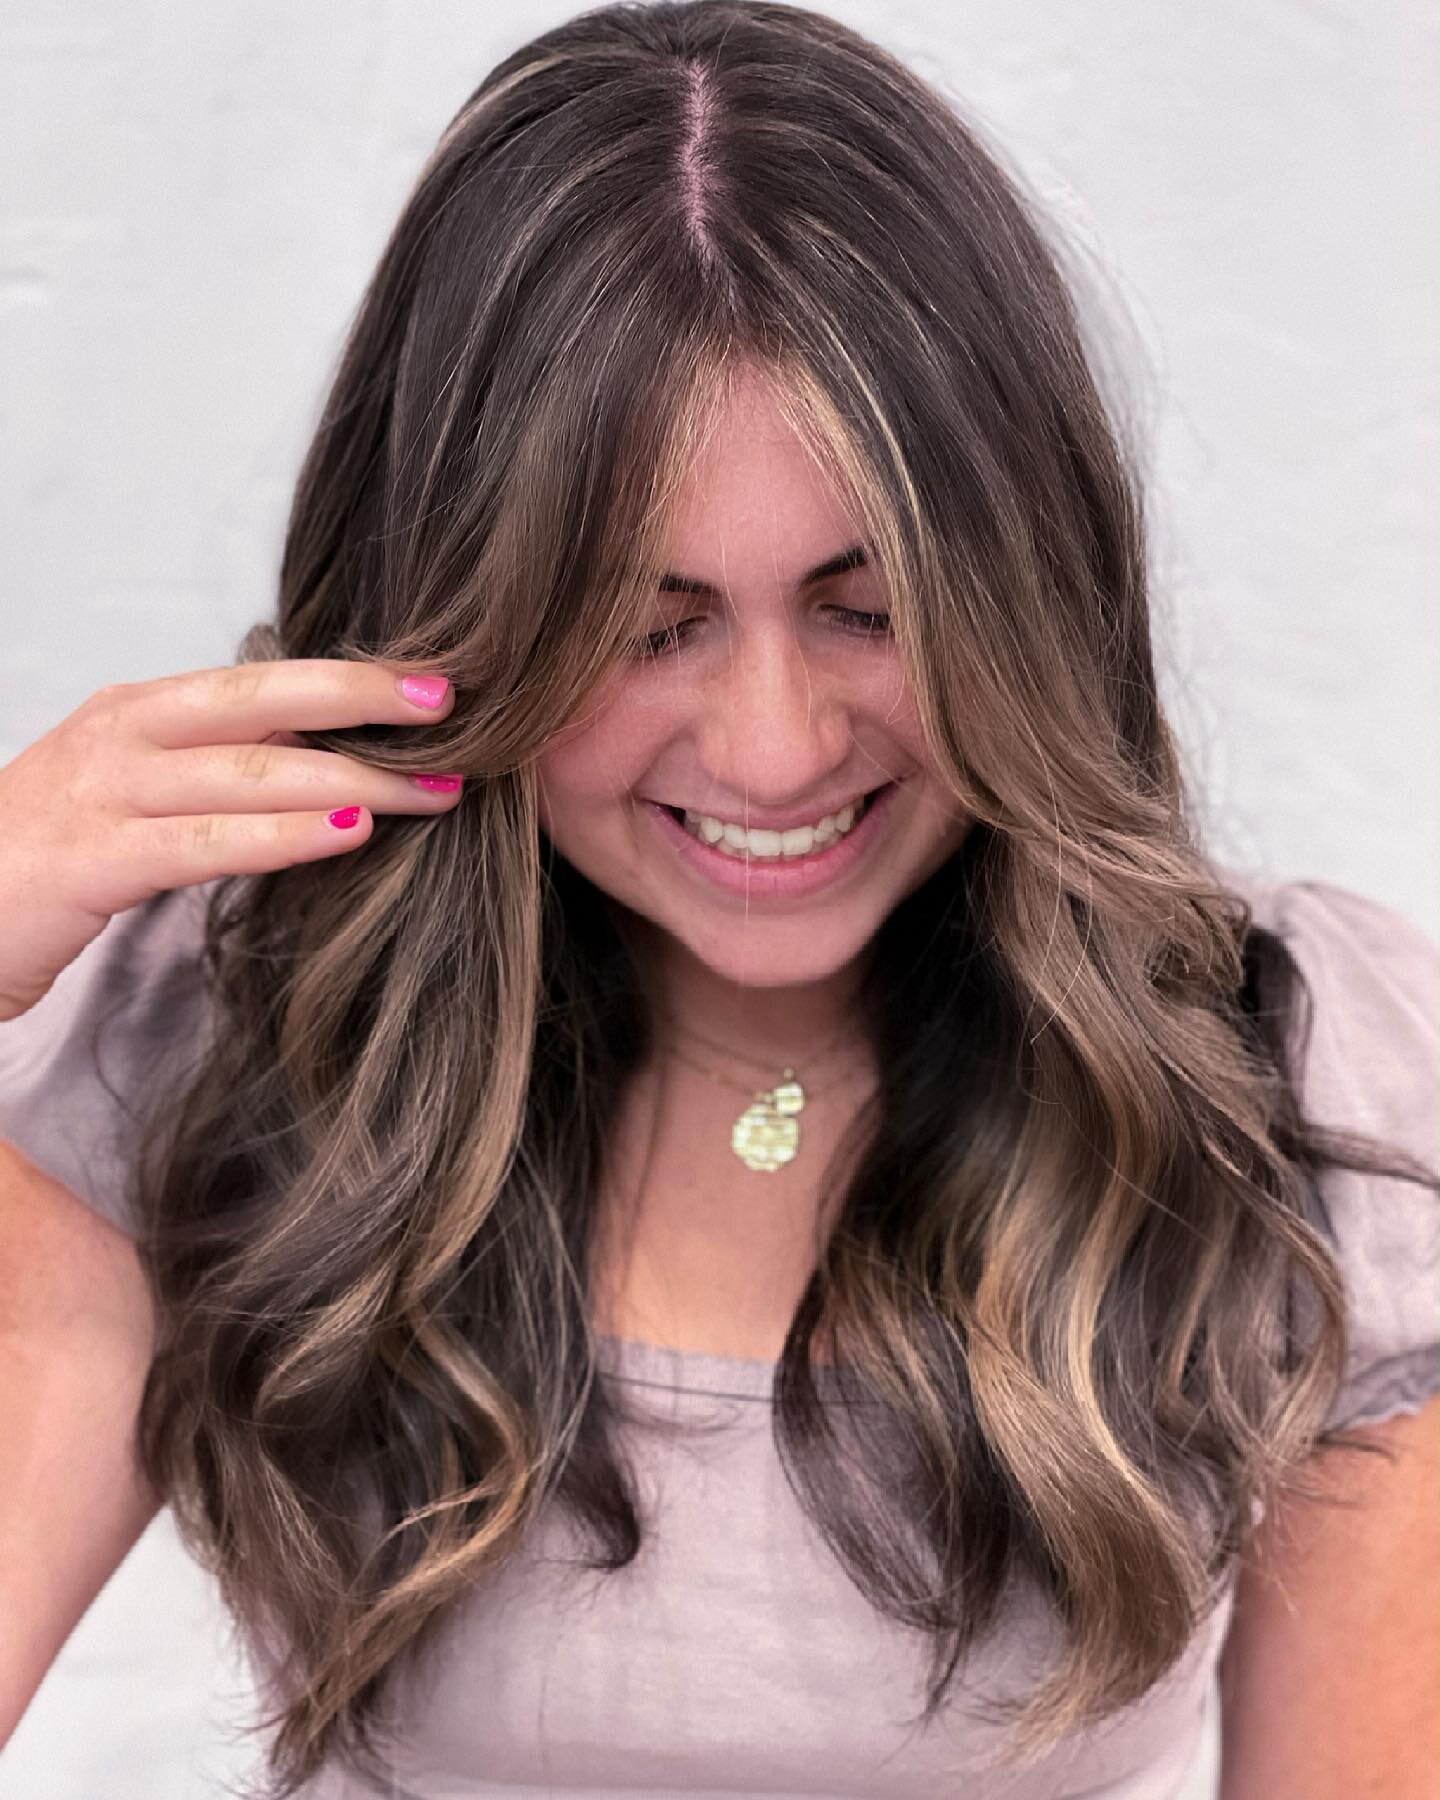 That smile is part of why we love what we do. Cut &amp; color  by @thehairdresserlisak